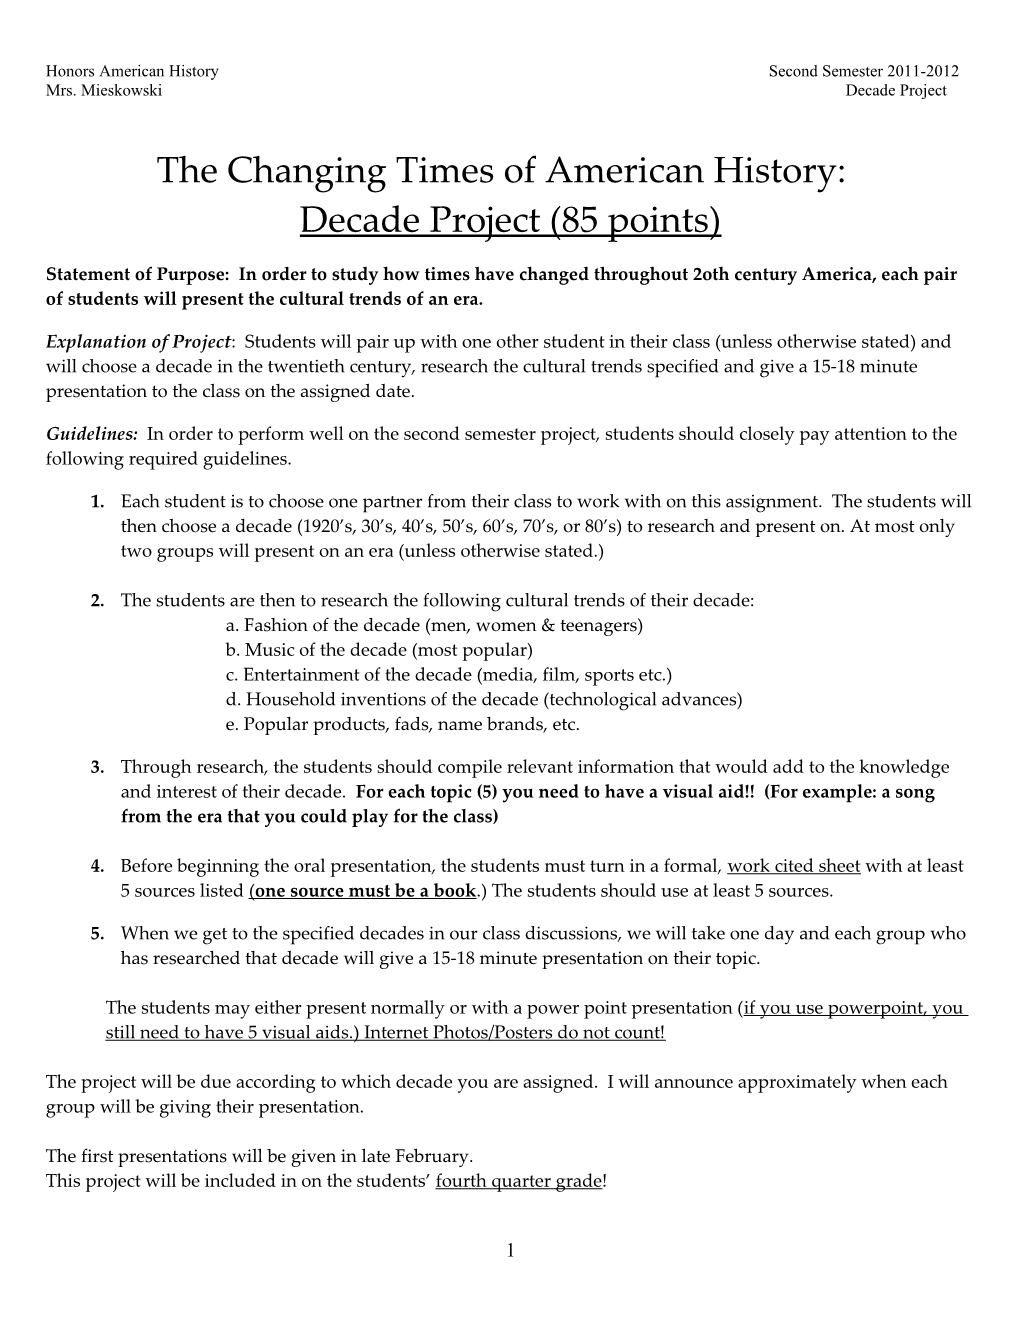 The Changing Times of American History: Decade Project